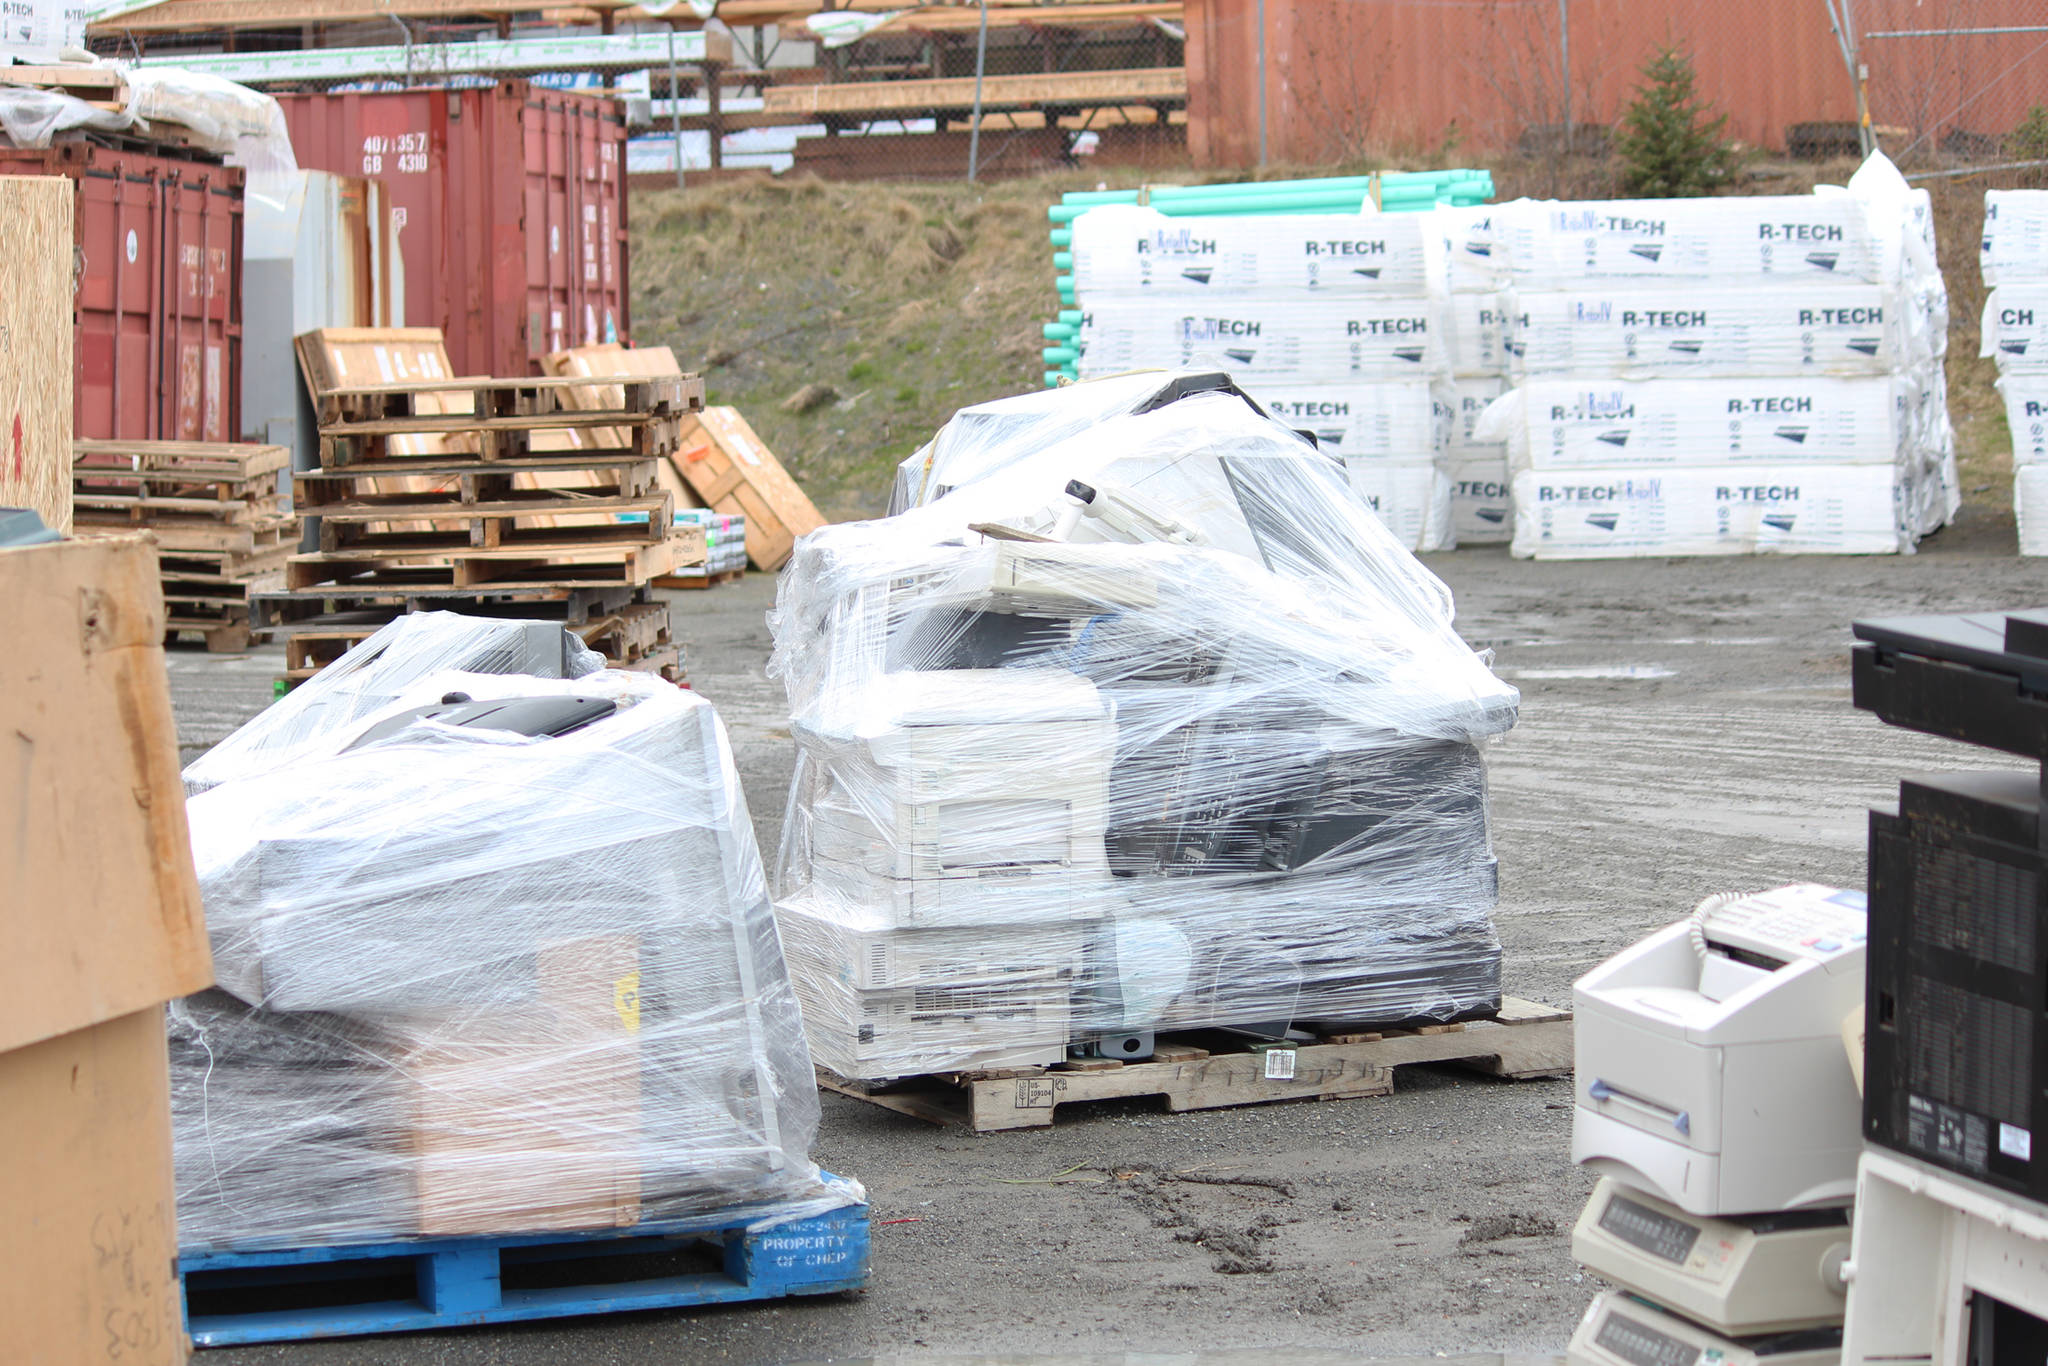 Pallets topped with wrapped electronics sit waiting to be shipped to Anchorage and Seattle for recycling during Cook Inletkeeper’s annual electronics recycling event Saturday, May 5, 2018 behind Spenard Builders Supply in Homer, Alaska. (Photo by Megan Pacer/Homer News)